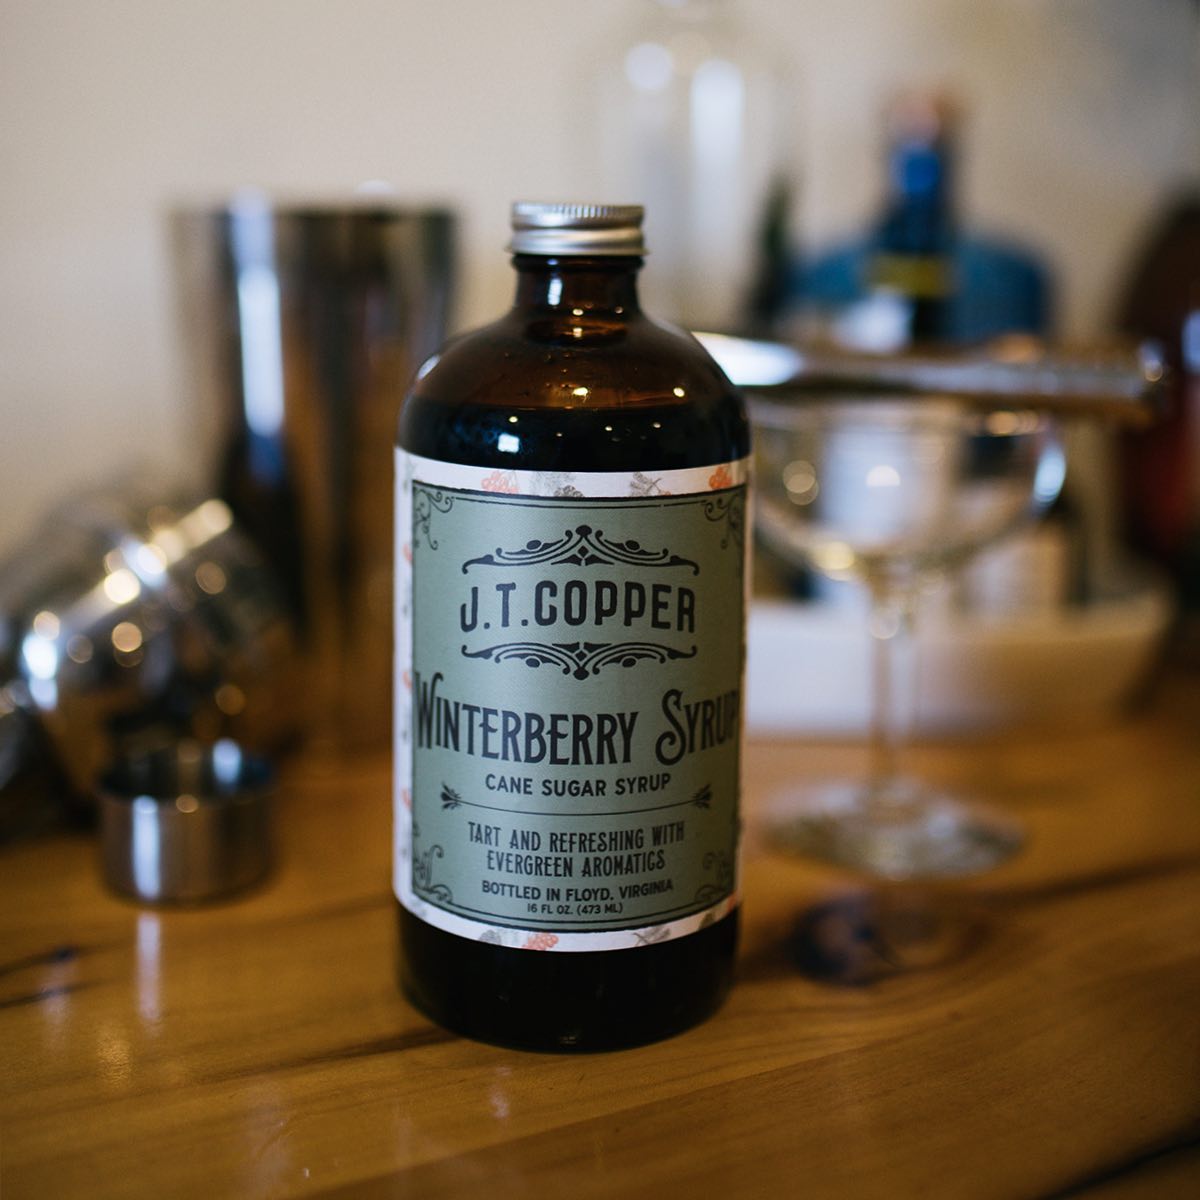 Winterberry Syrup